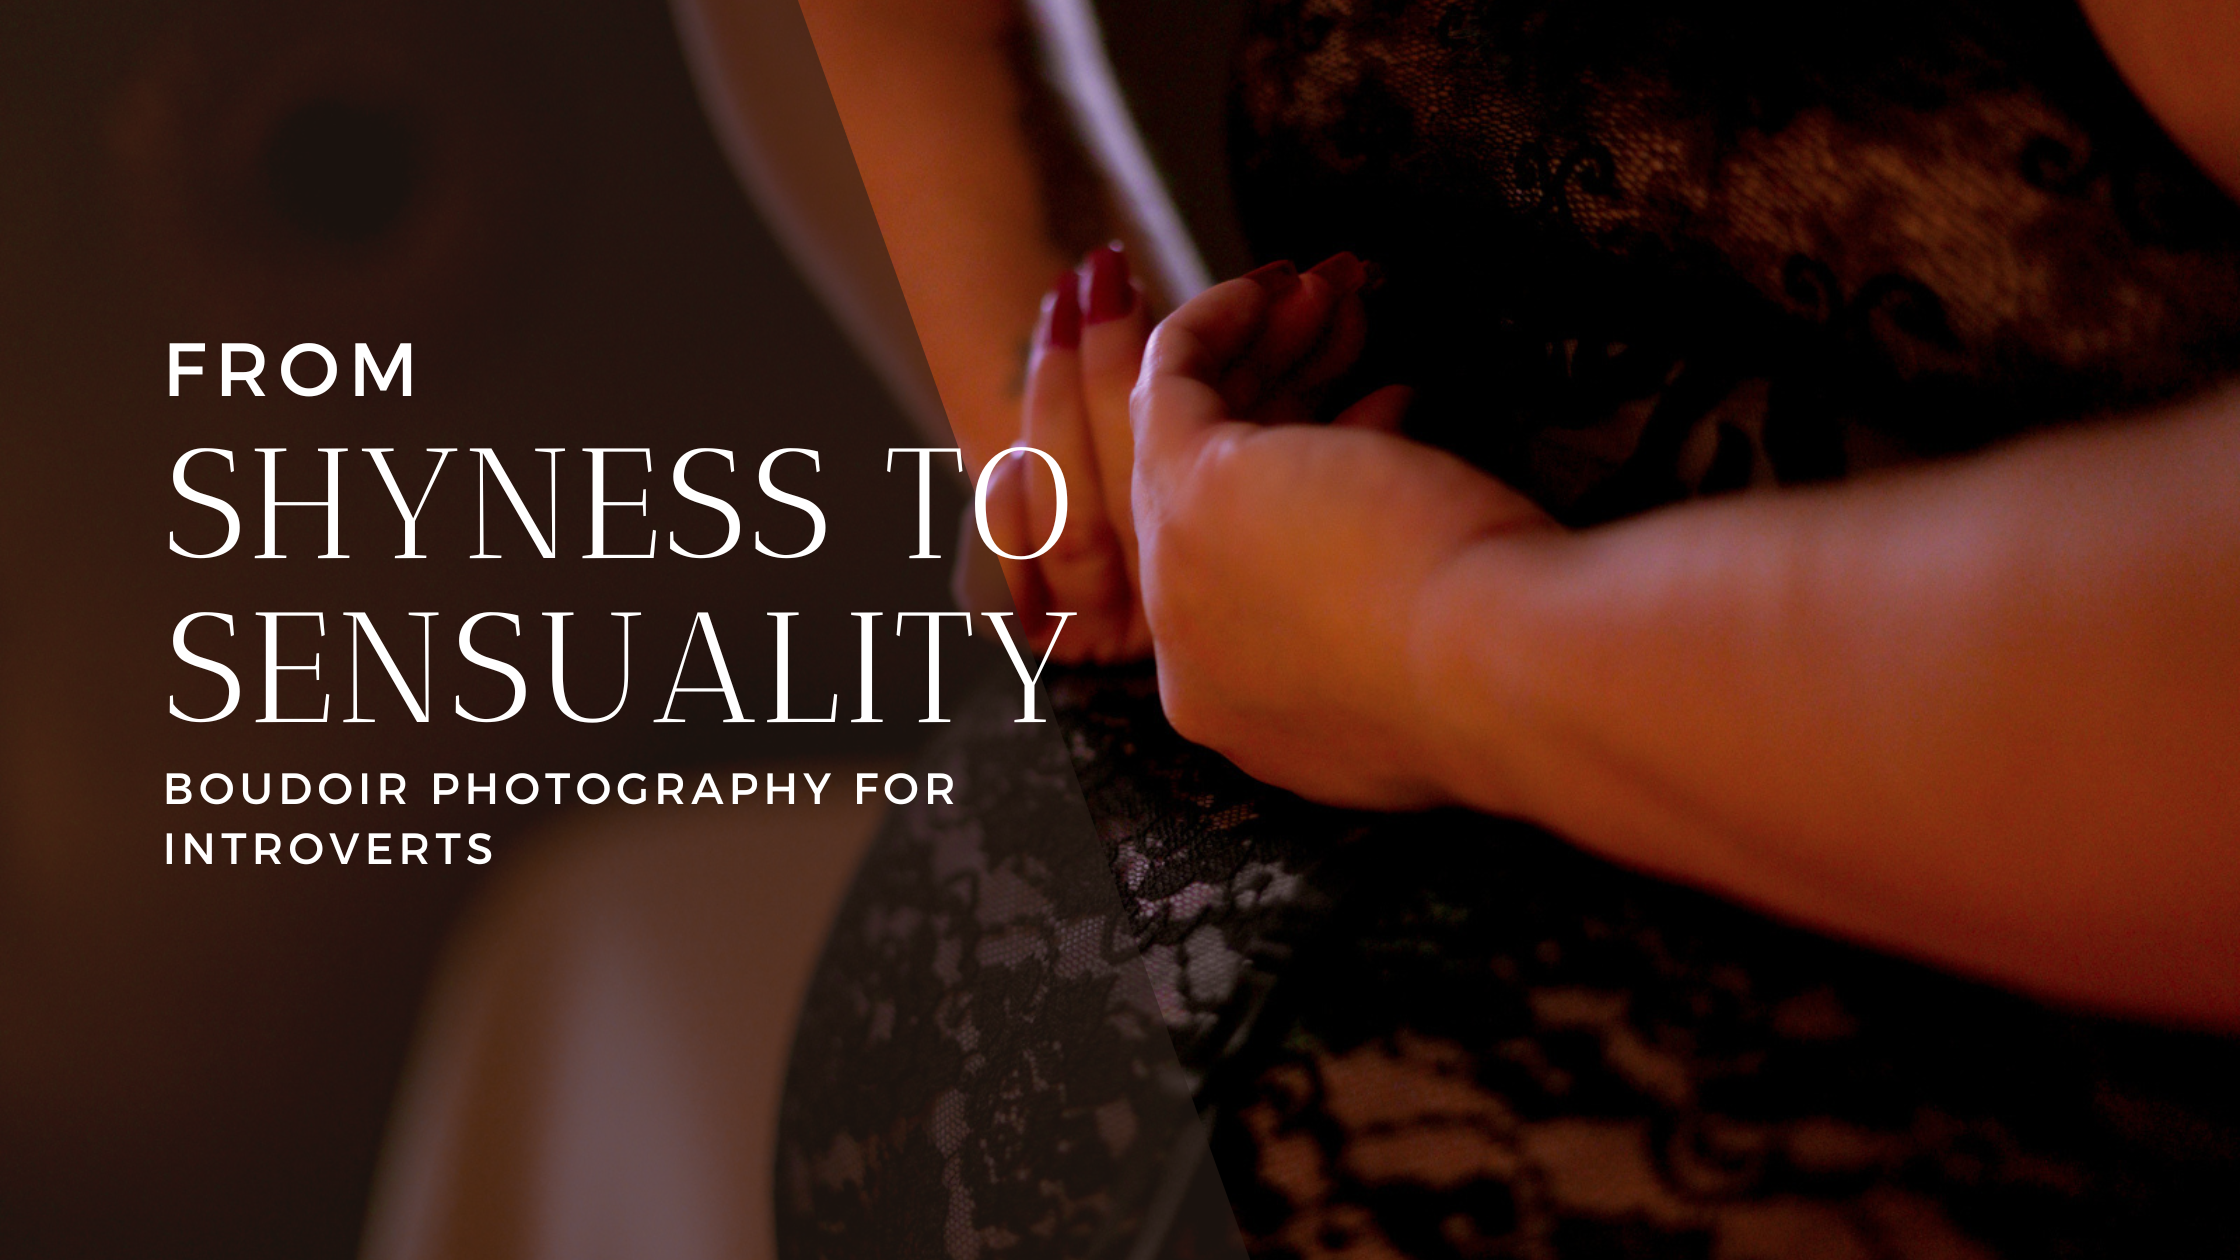 Boudoir photography, embracing vulnerability, self-love, authenticity, inner strength.Courage, self-acceptance, boudoir photographer, empowerment.